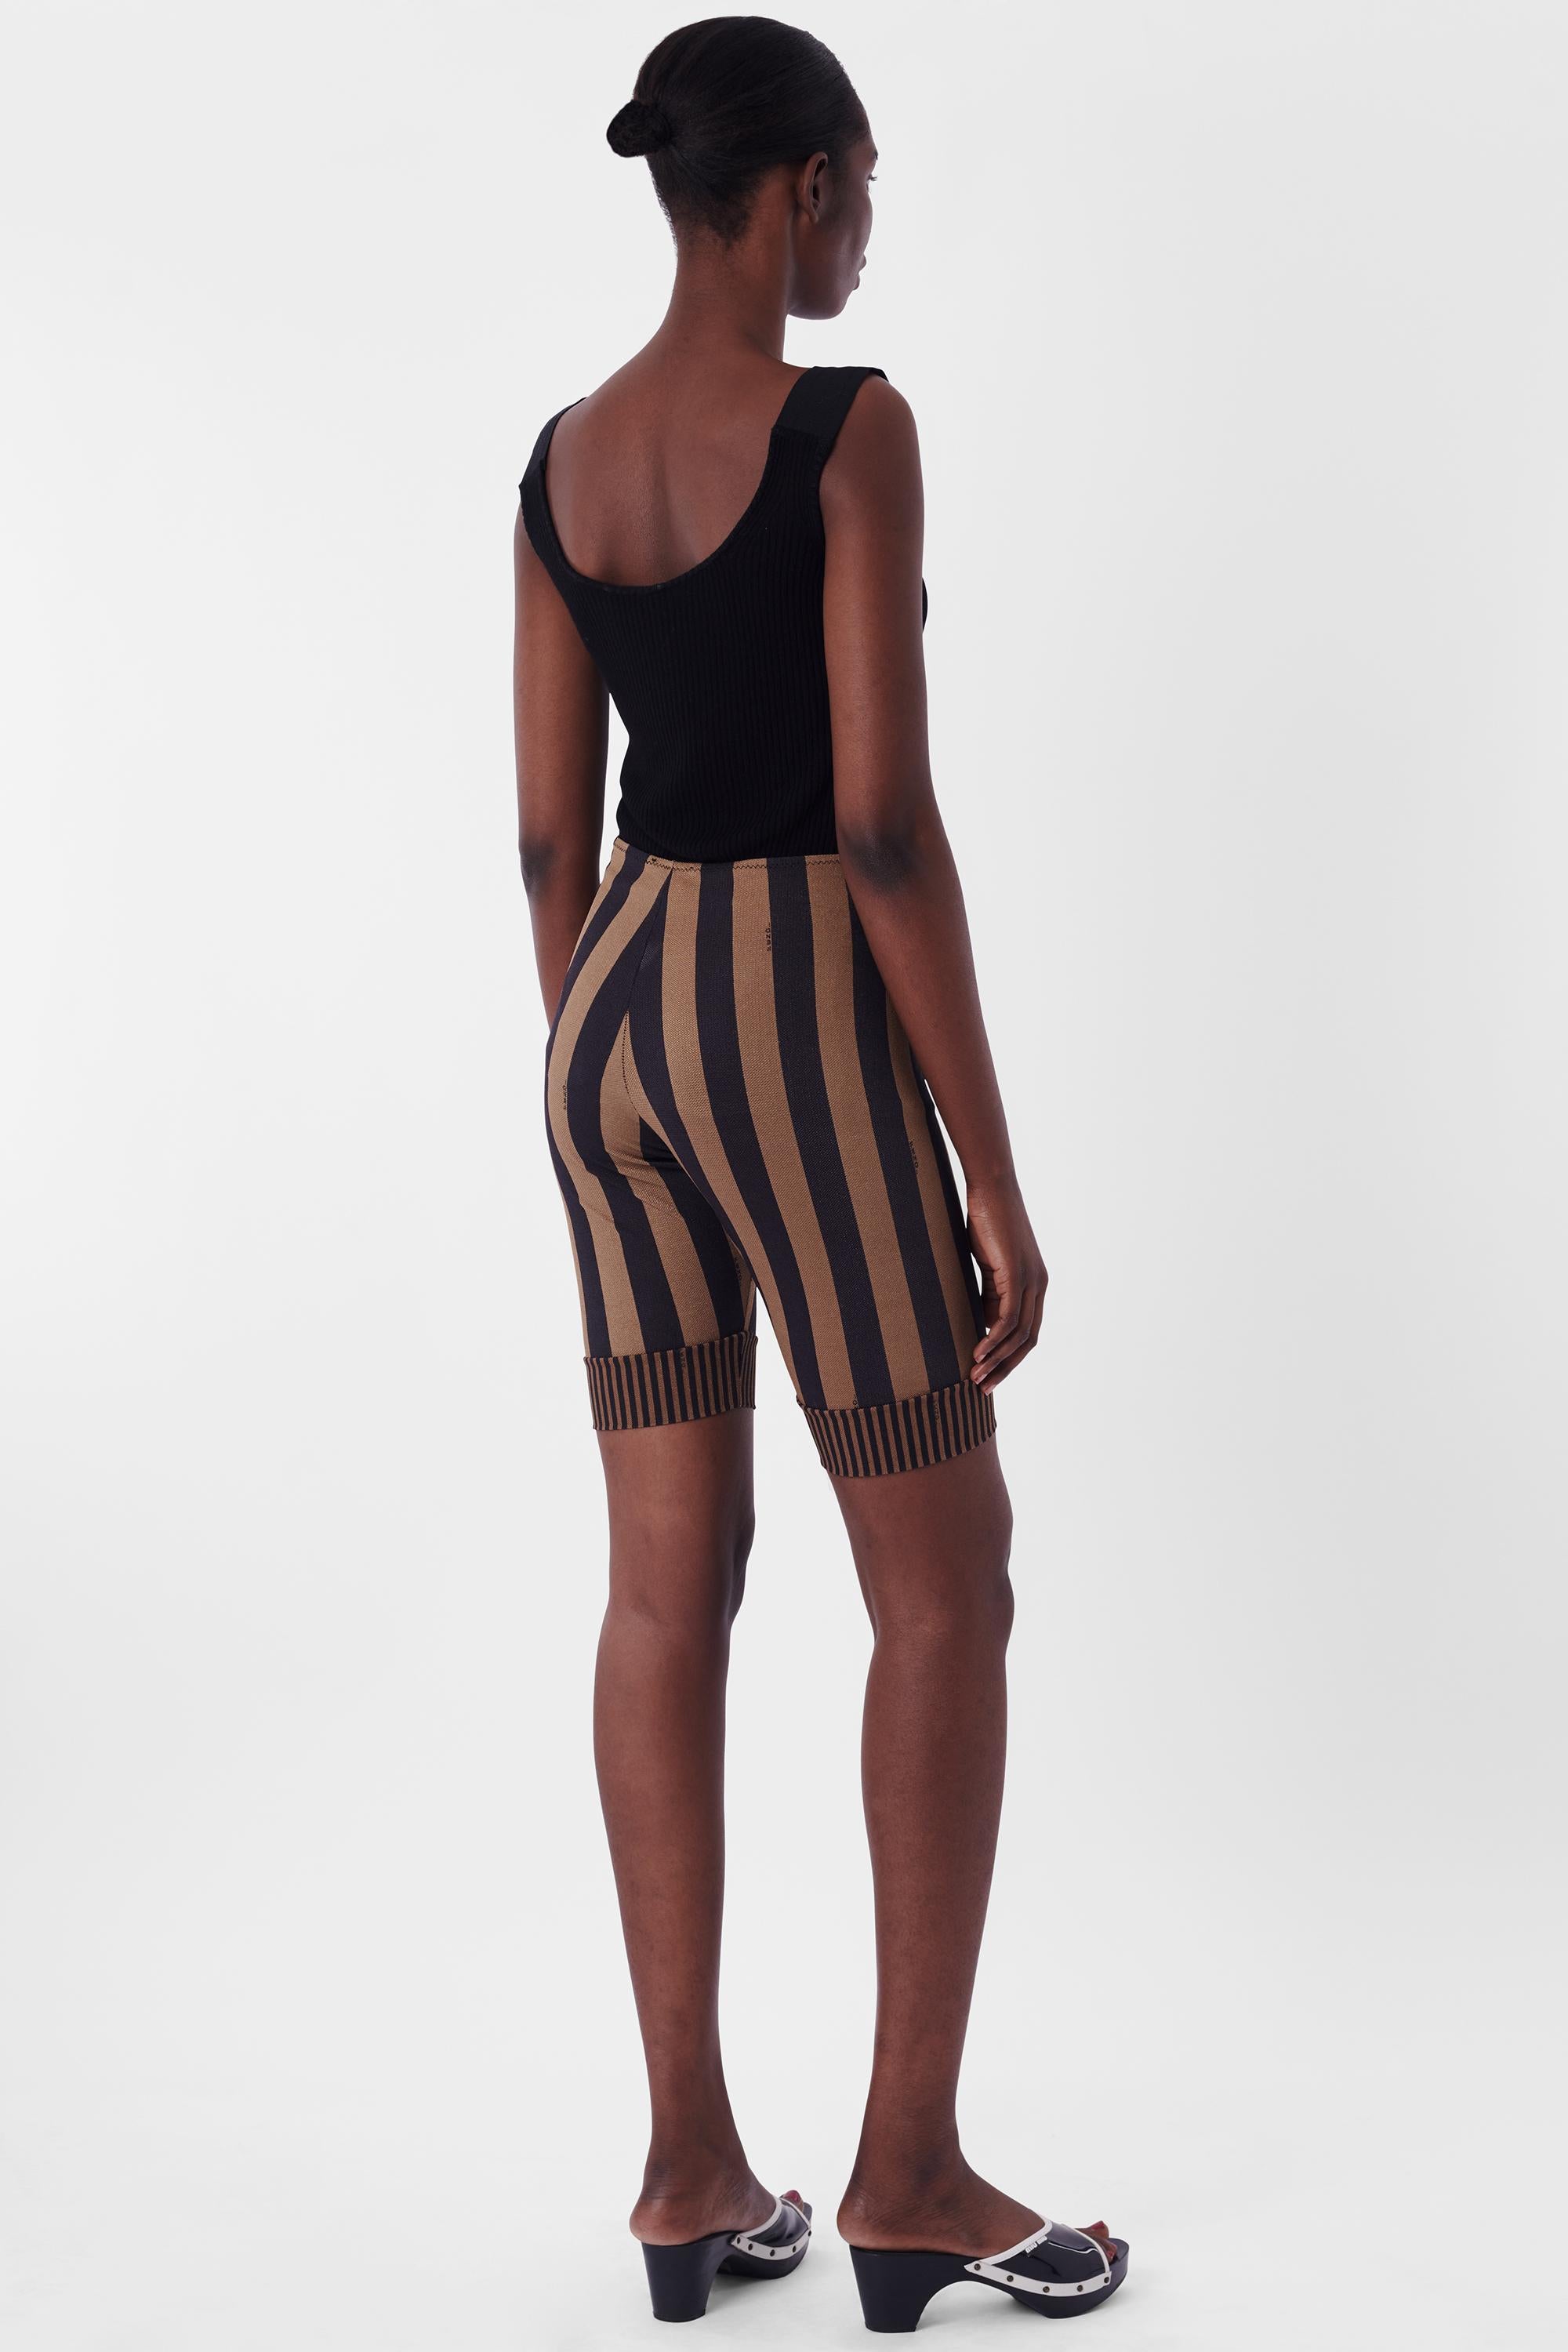 Fendi Vintage Striped Cycling Shorts In Excellent Condition For Sale In London, GB